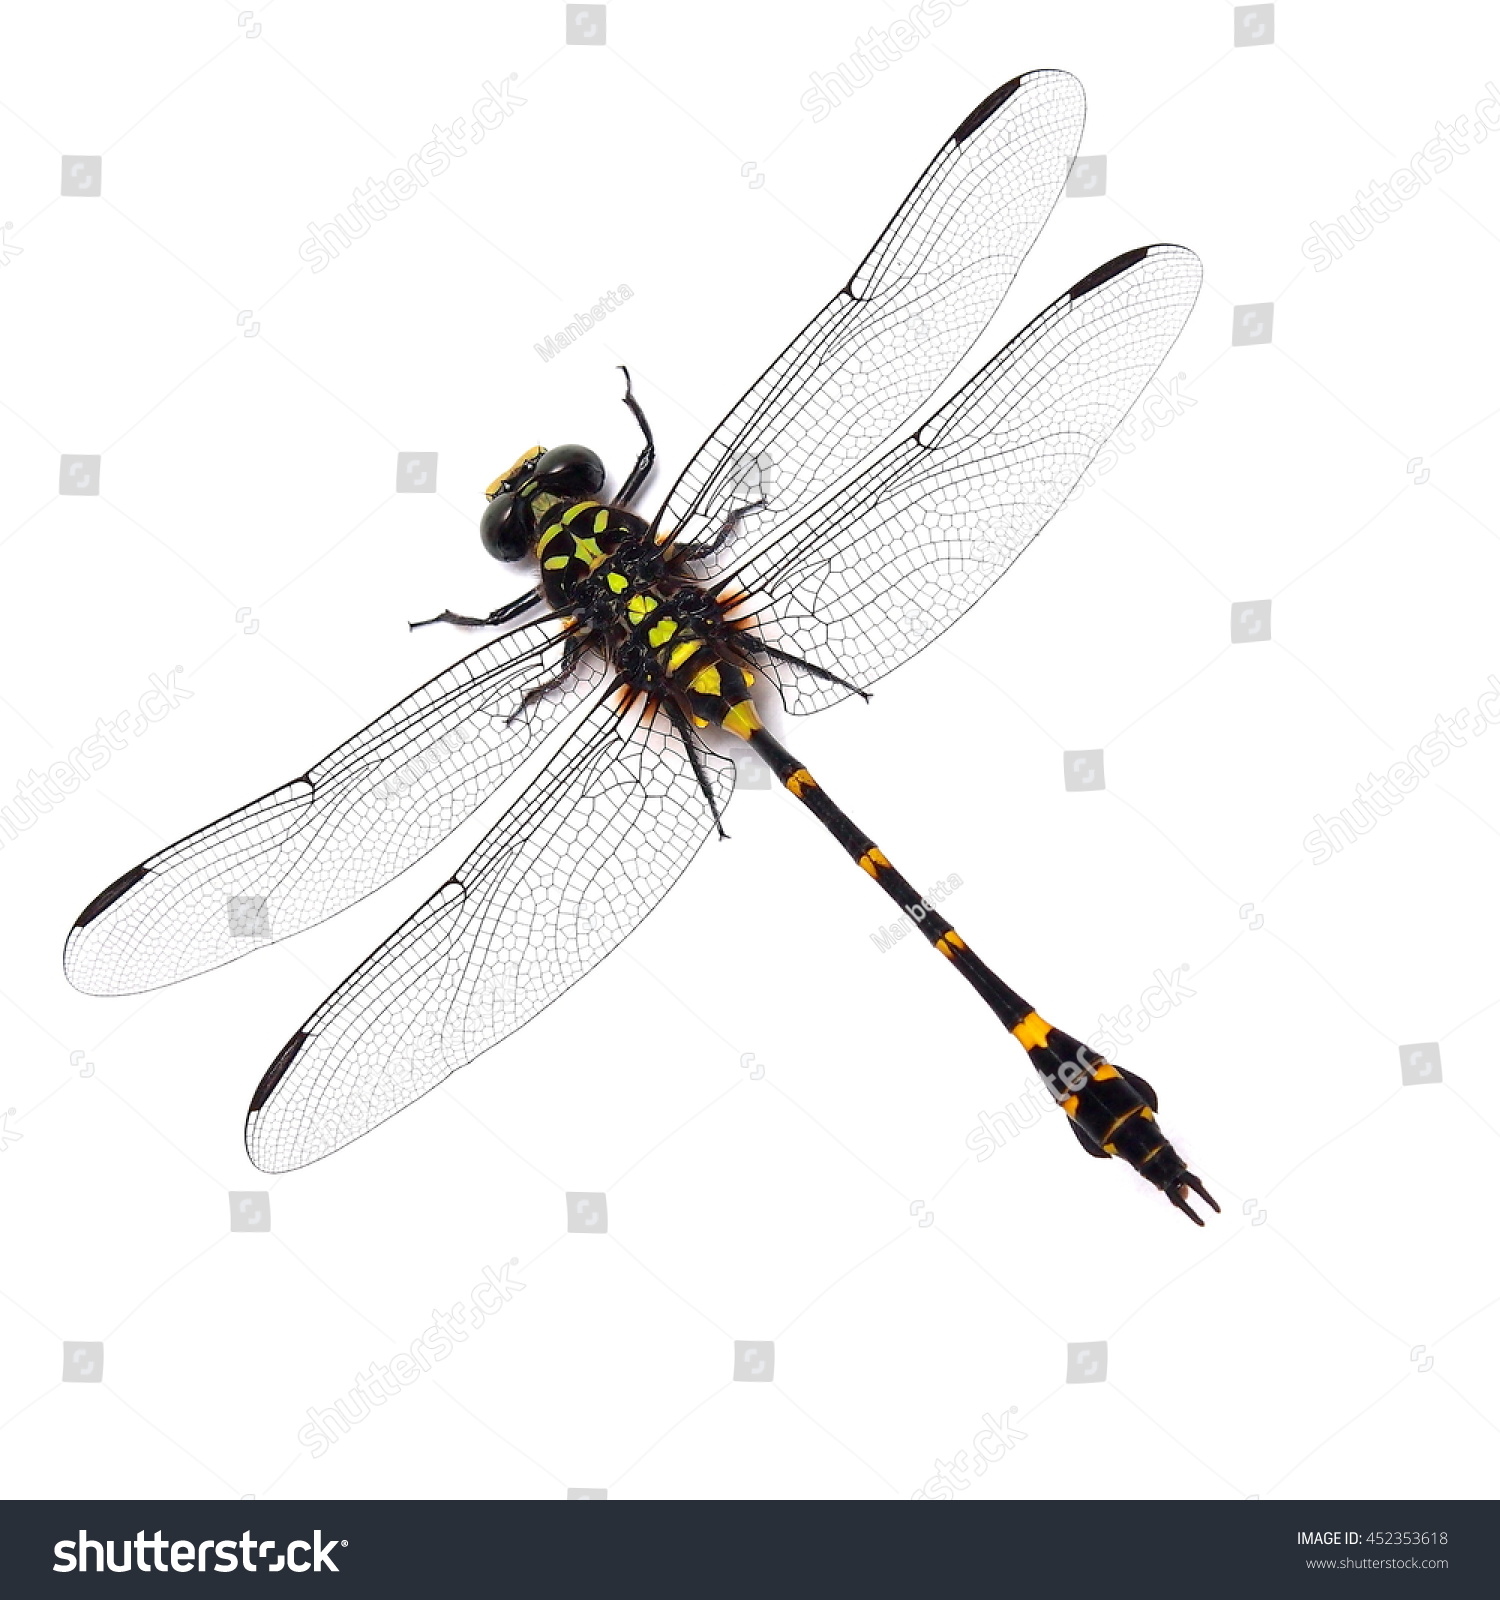 Dragonfly Isolated On White Background Stock Photo 452353618 - Shutterstock